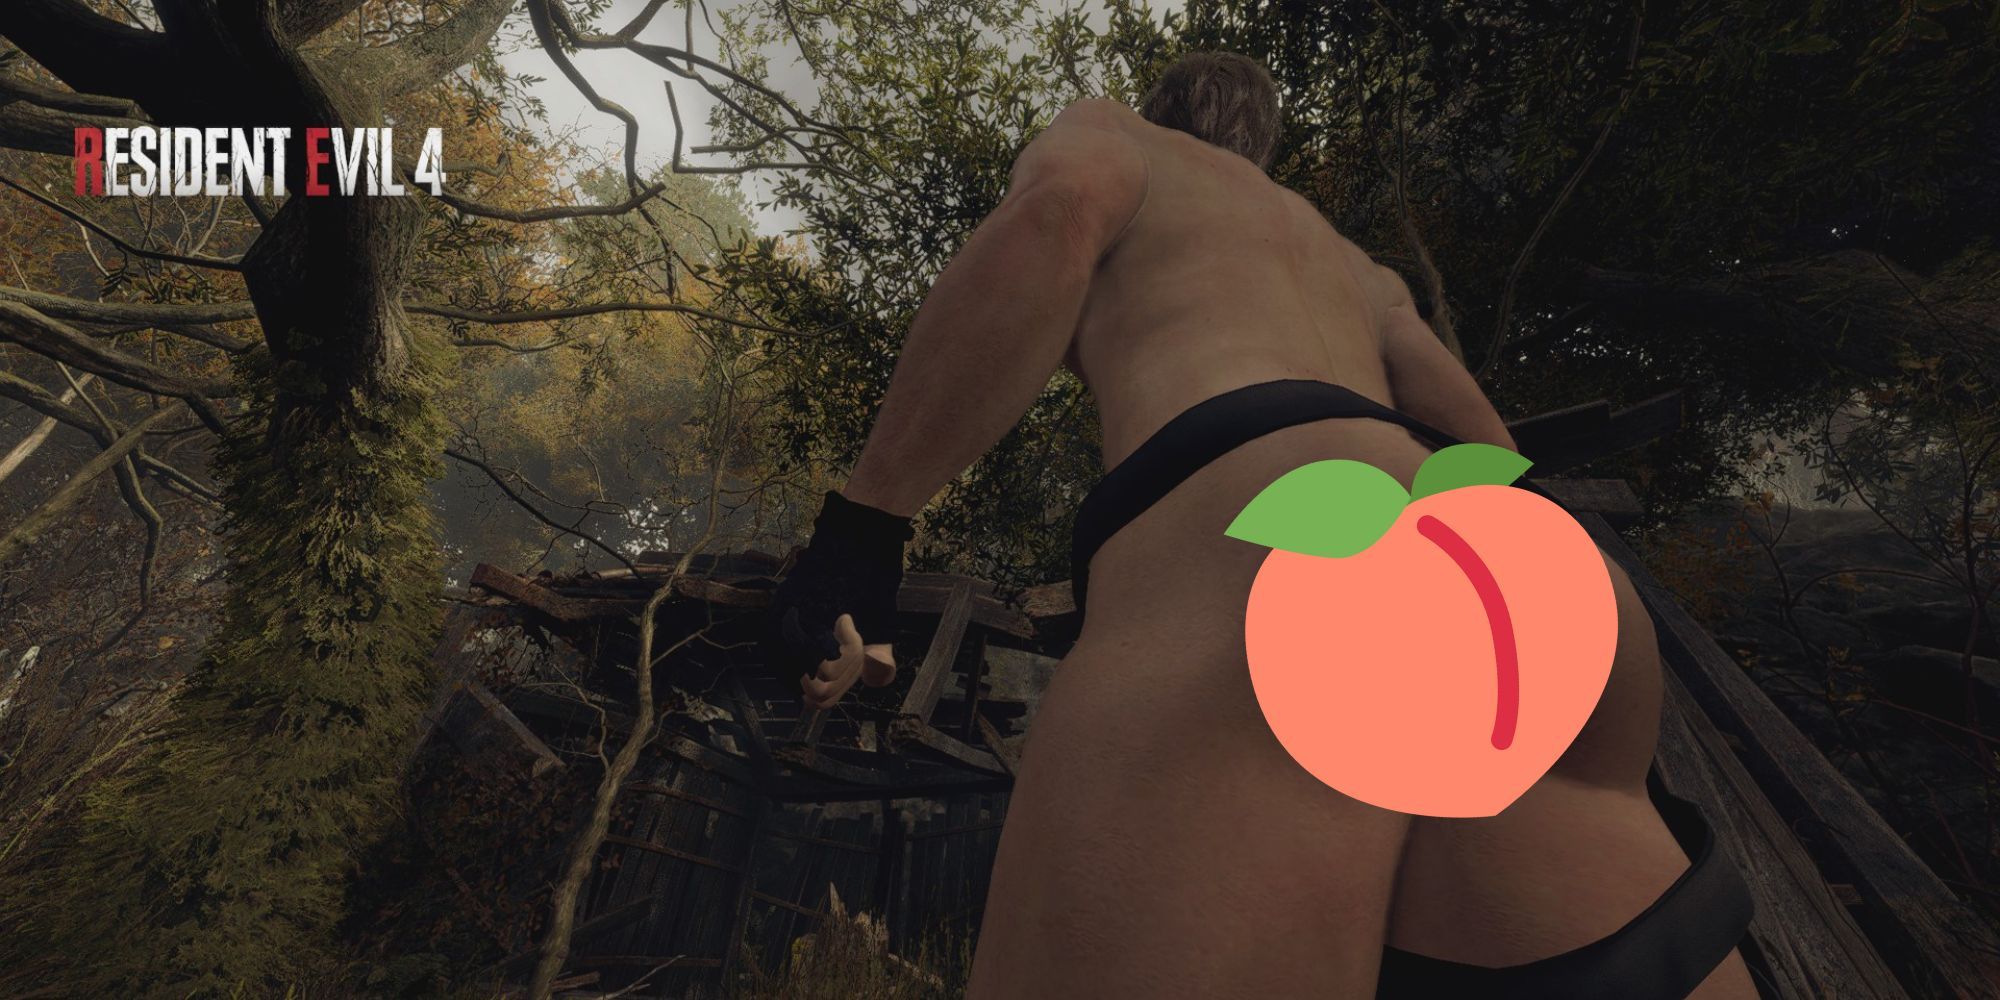 A mostly nude Leon from Resident Evil 4 Remake, with an image of a peach covering his bum